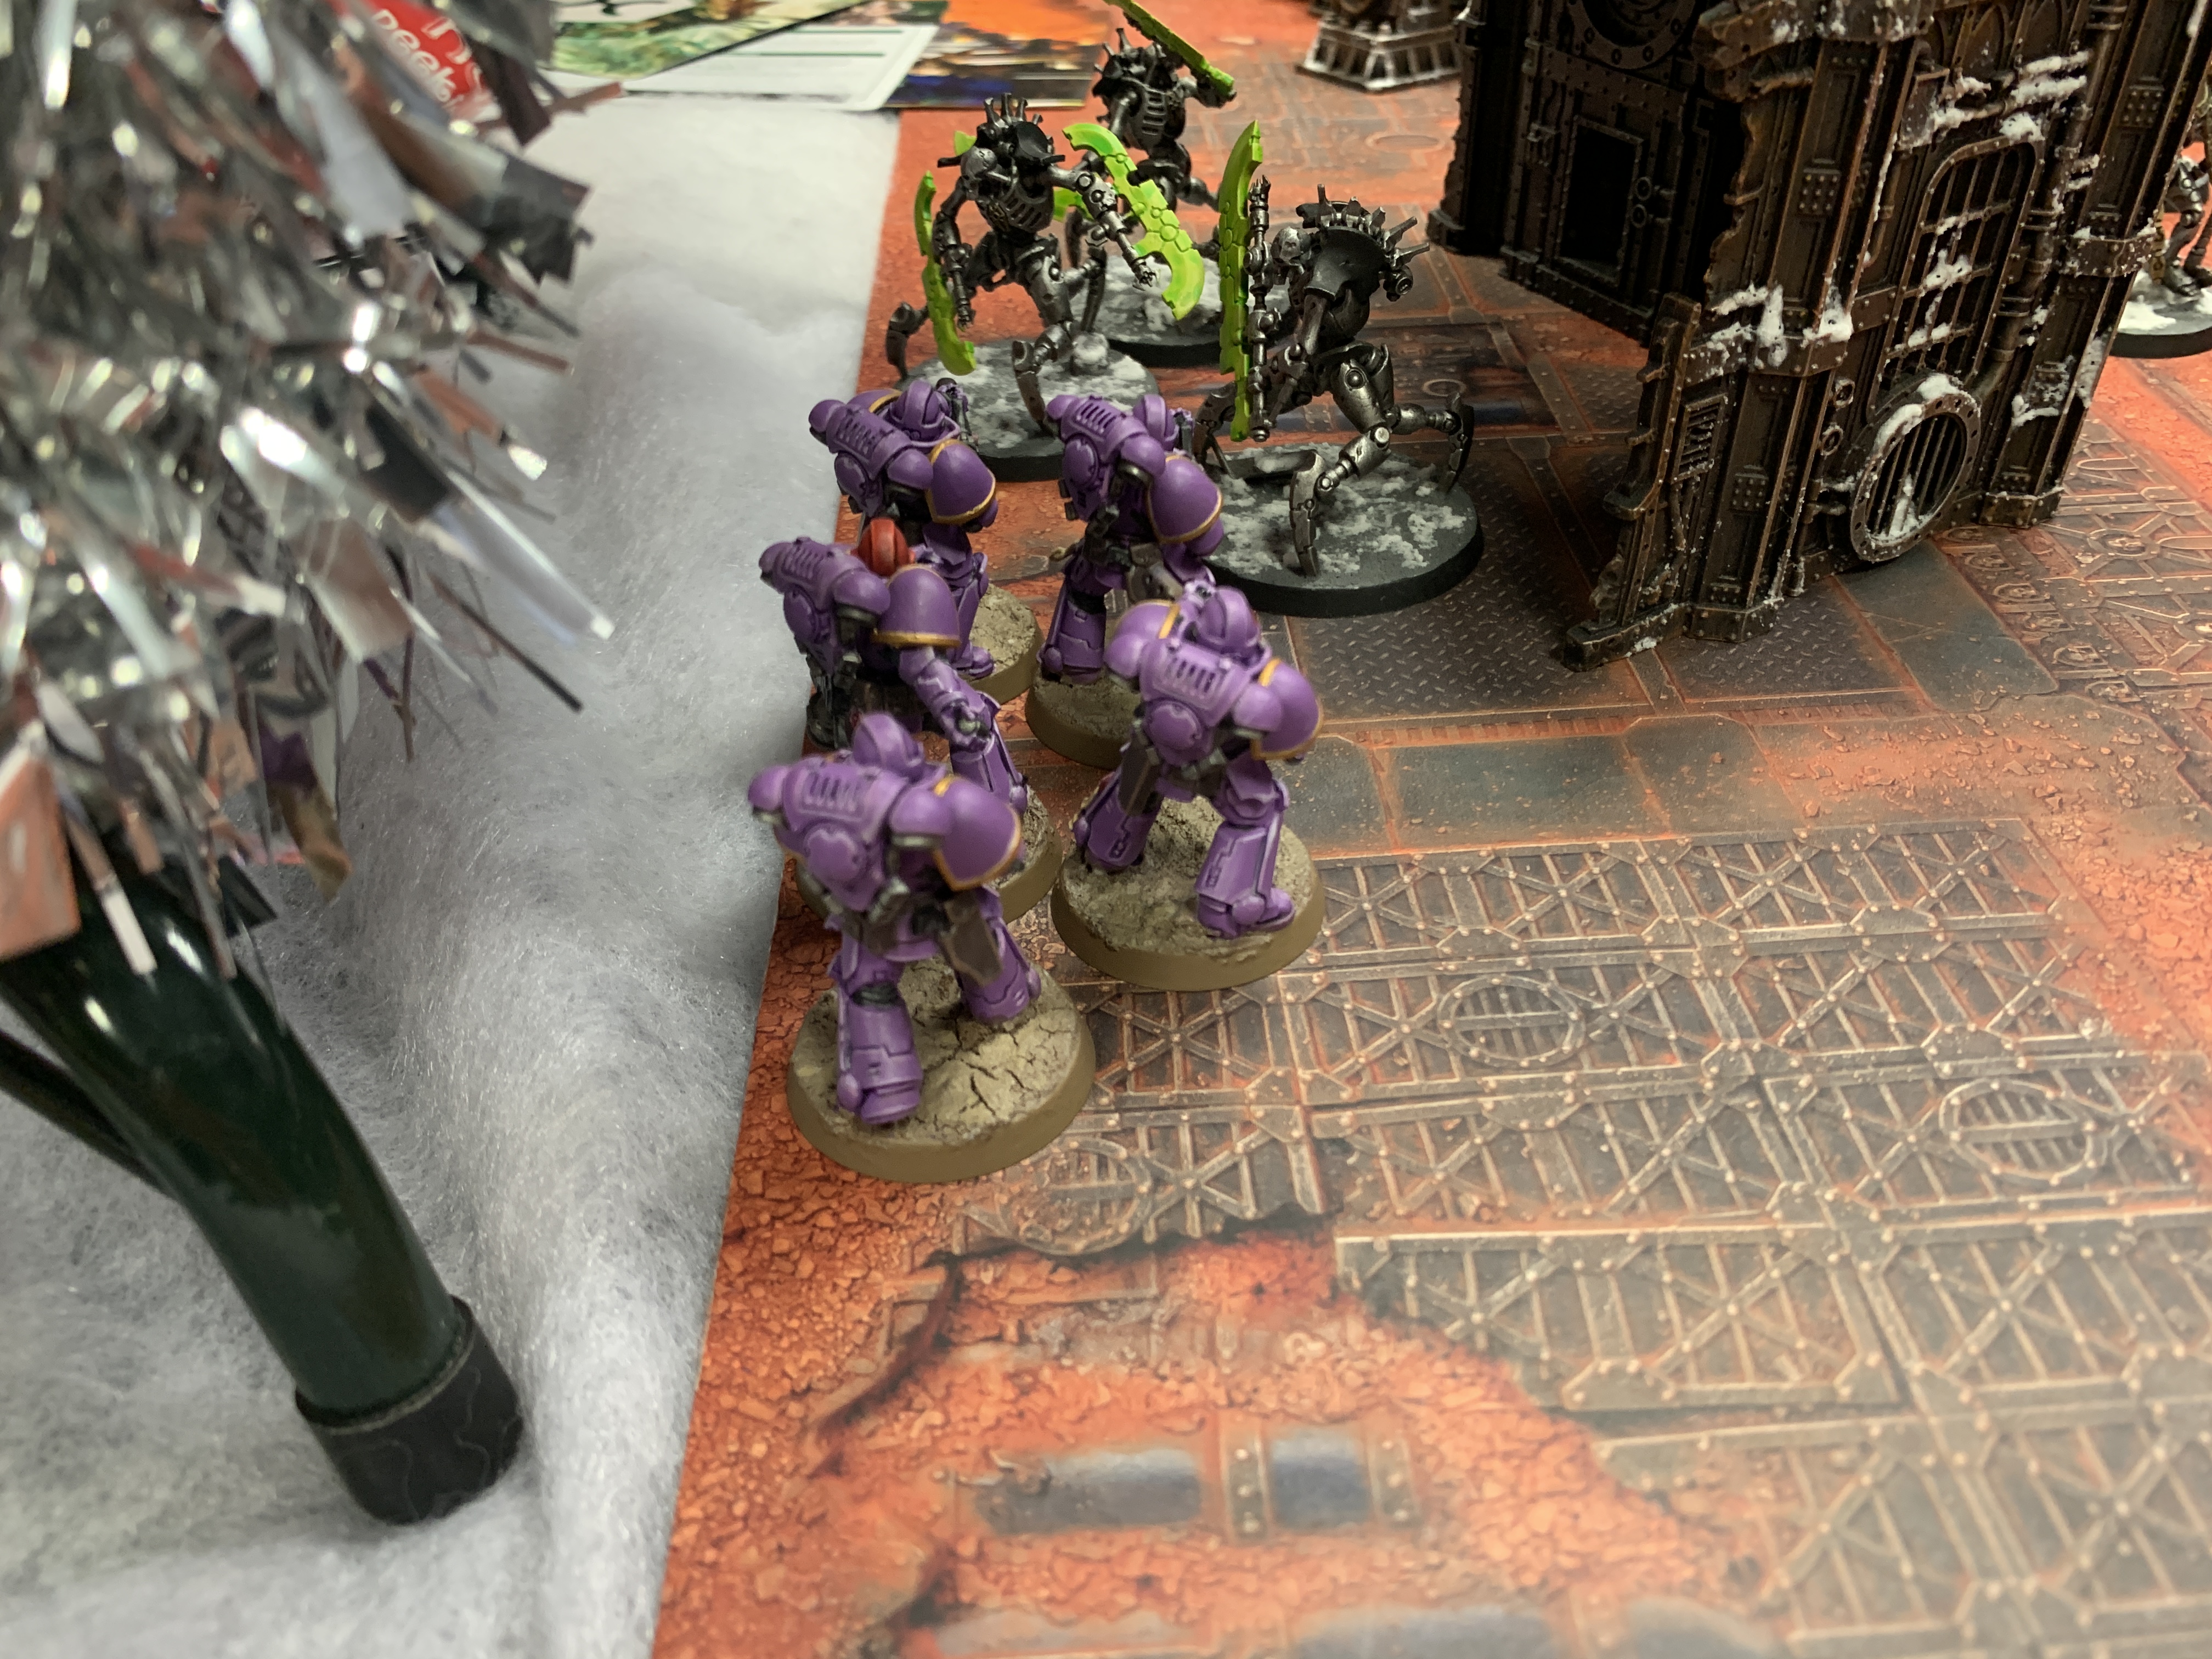 Five purple Infernus Marines facing three Necron Skorpekh Destroyers wielding light green blades. They are stood next to a bit of scenery and some tinsel from a Christmas tree